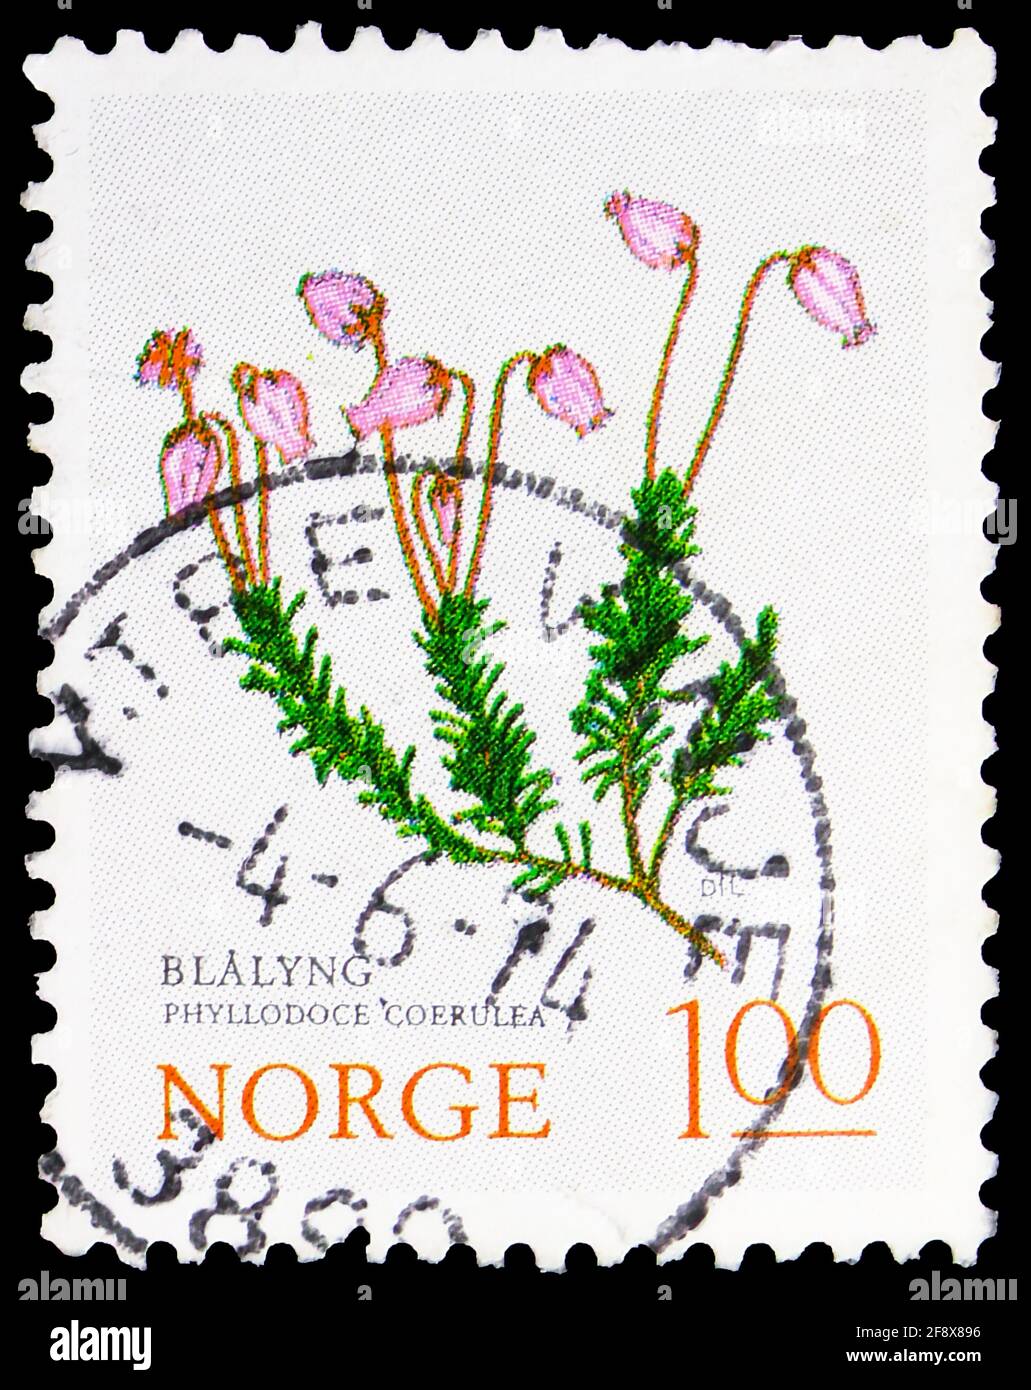 MOSCOW, RUSSIA - OCTOBER 1, 2019: Postage stamp printed in Norway shows Mountain Heath (Phyllodoce caerulea), Flowers serie, 1 kr - Norwegian krone, c Stock Photo